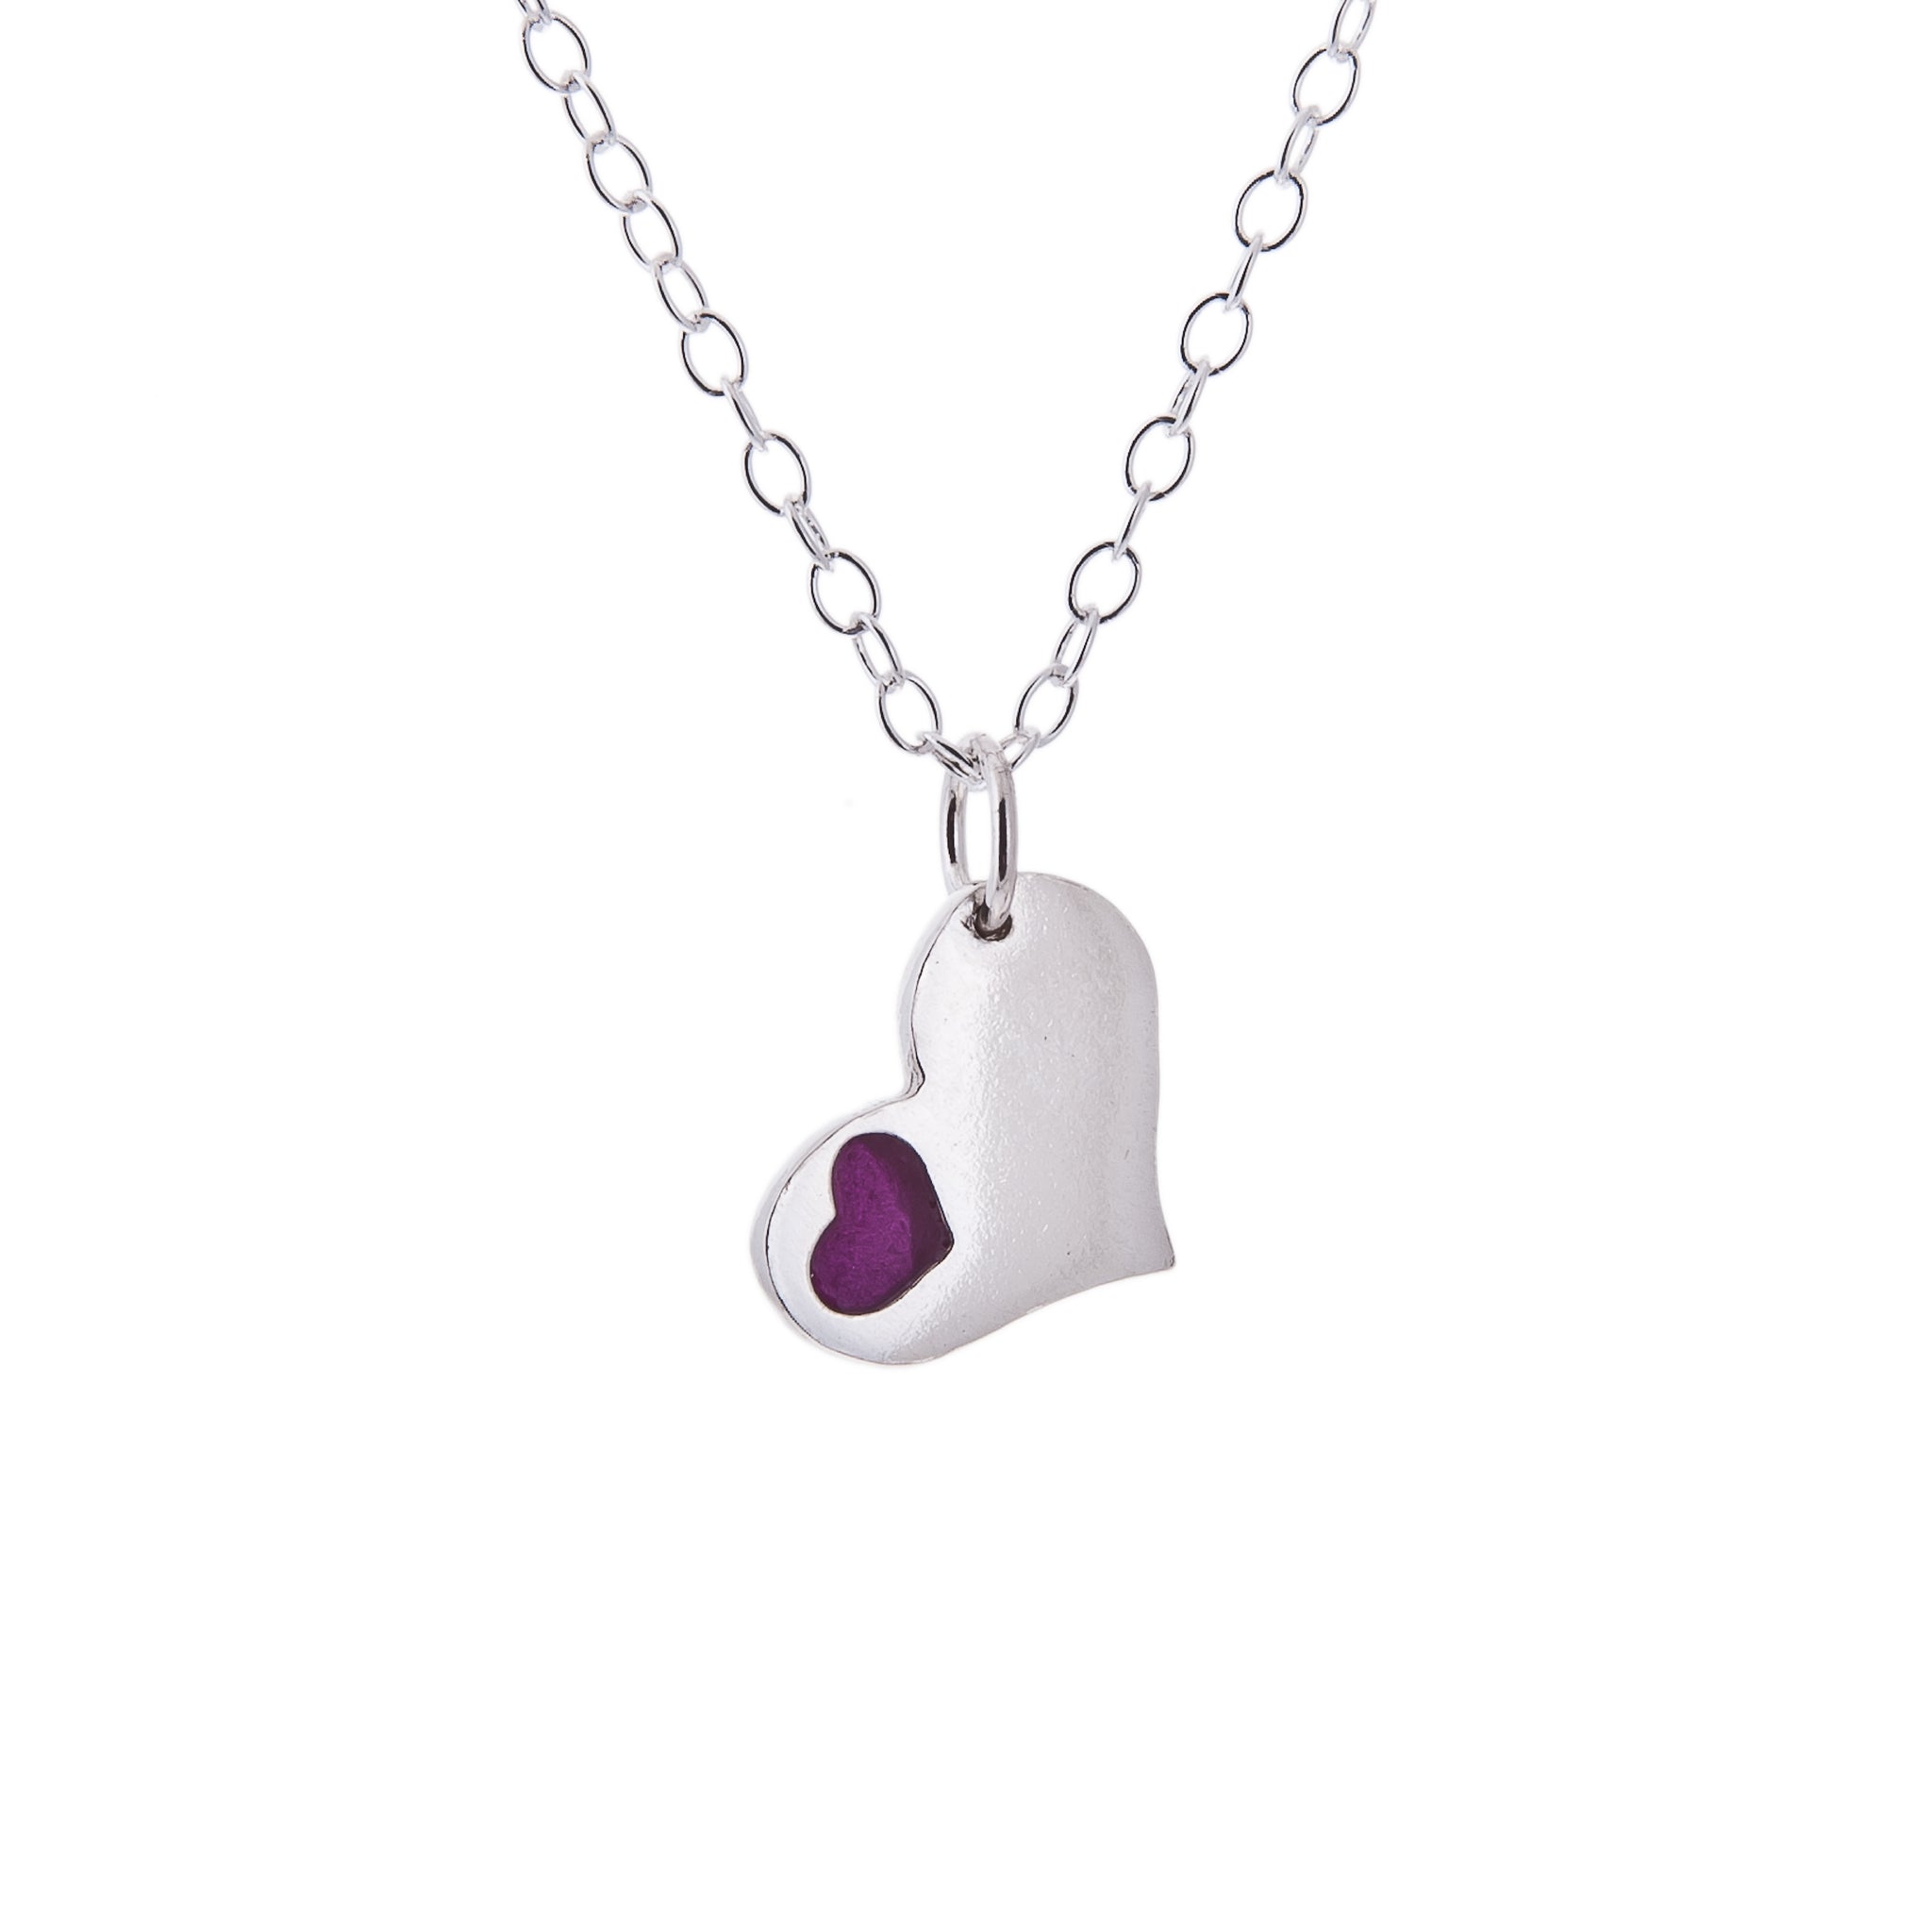 Silver Heart pendant with Small Pink Heart detail on white background, Kate Wimbush Jewellery